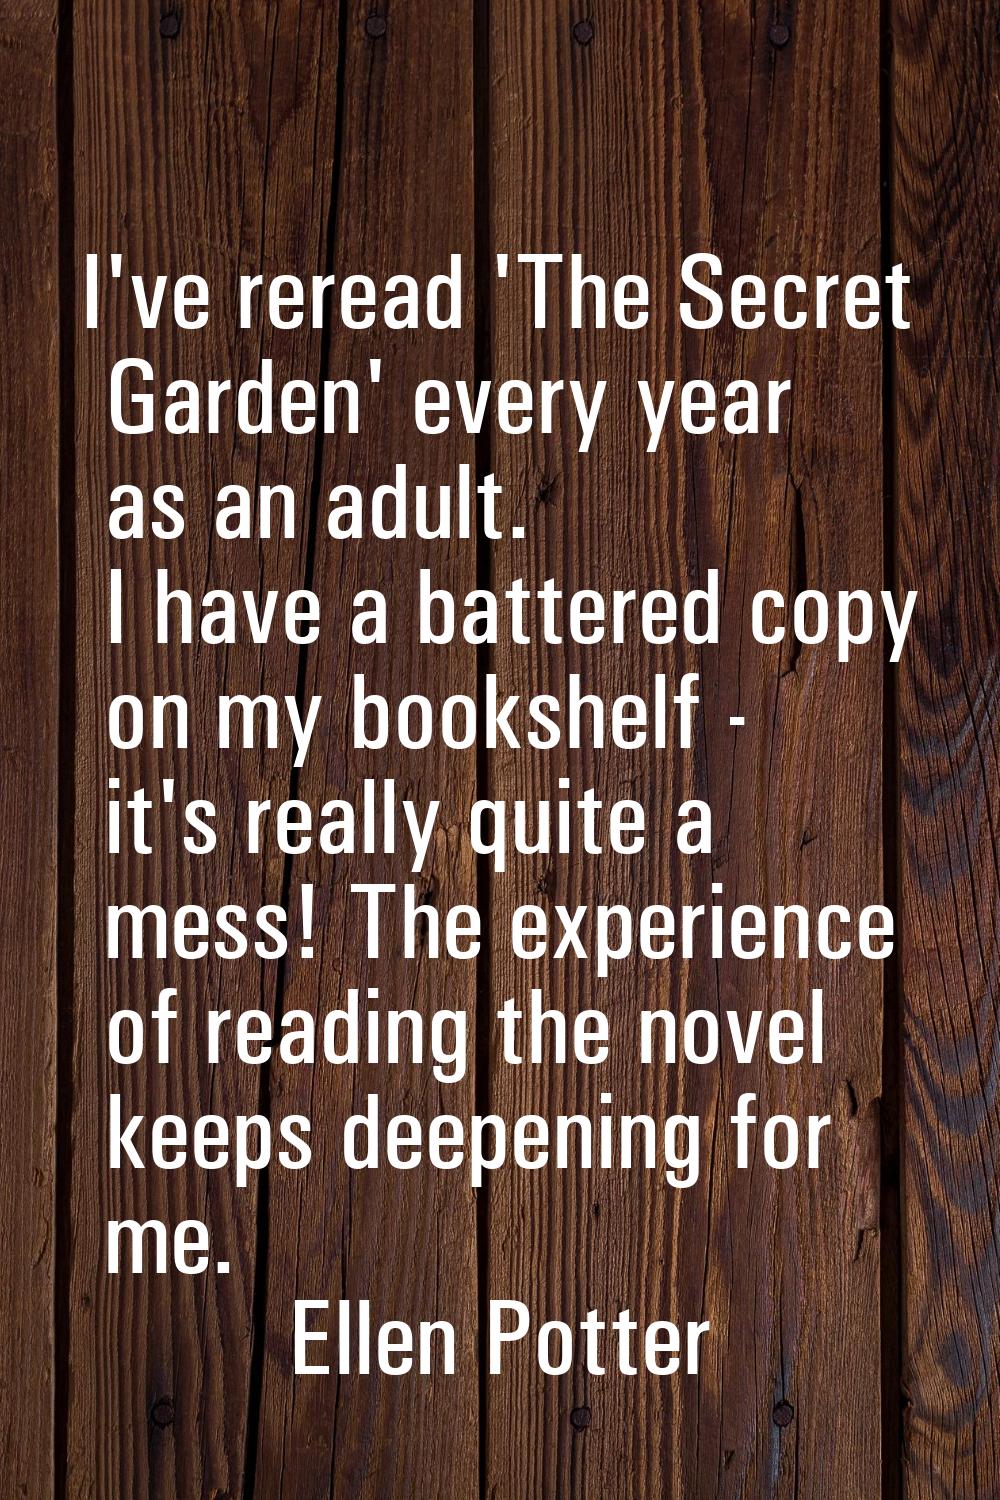 I've reread 'The Secret Garden' every year as an adult. I have a battered copy on my bookshelf - it